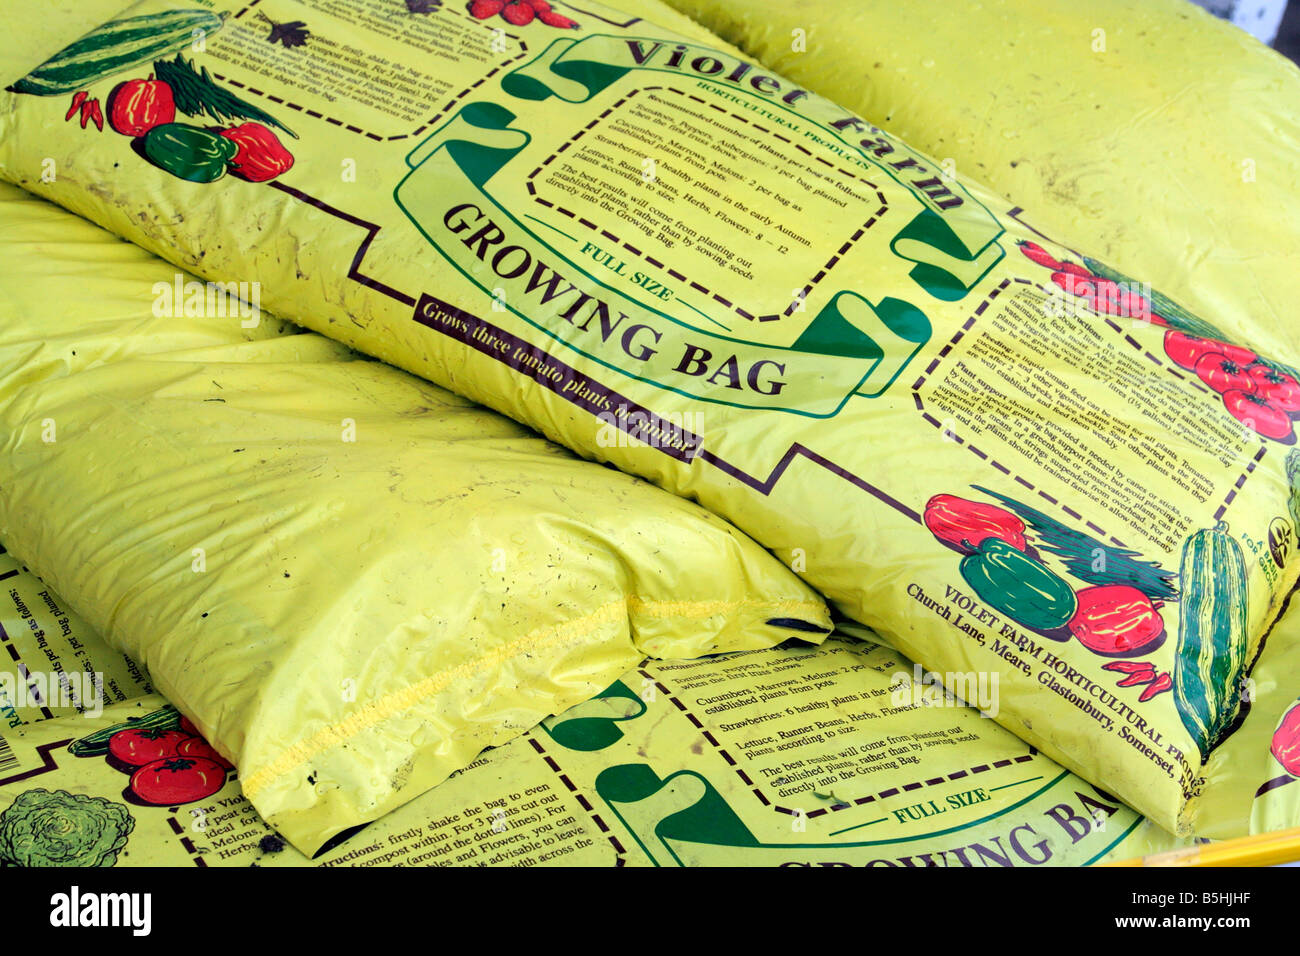 GROWBAGS GROWING BAGS Stock Photo